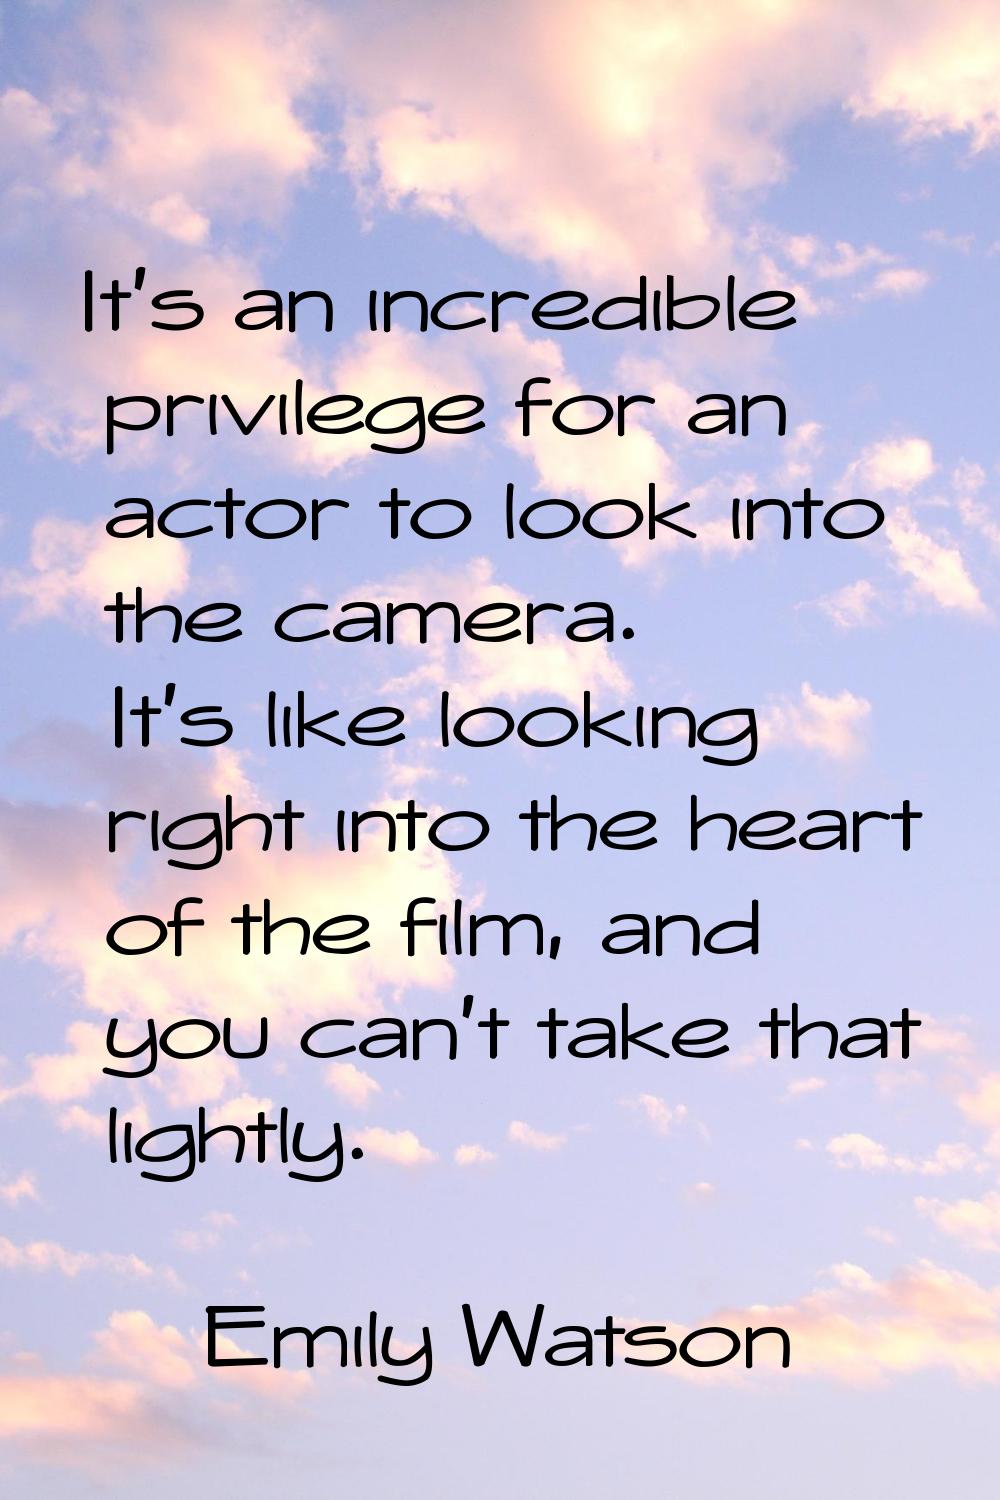 It's an incredible privilege for an actor to look into the camera. It's like looking right into the